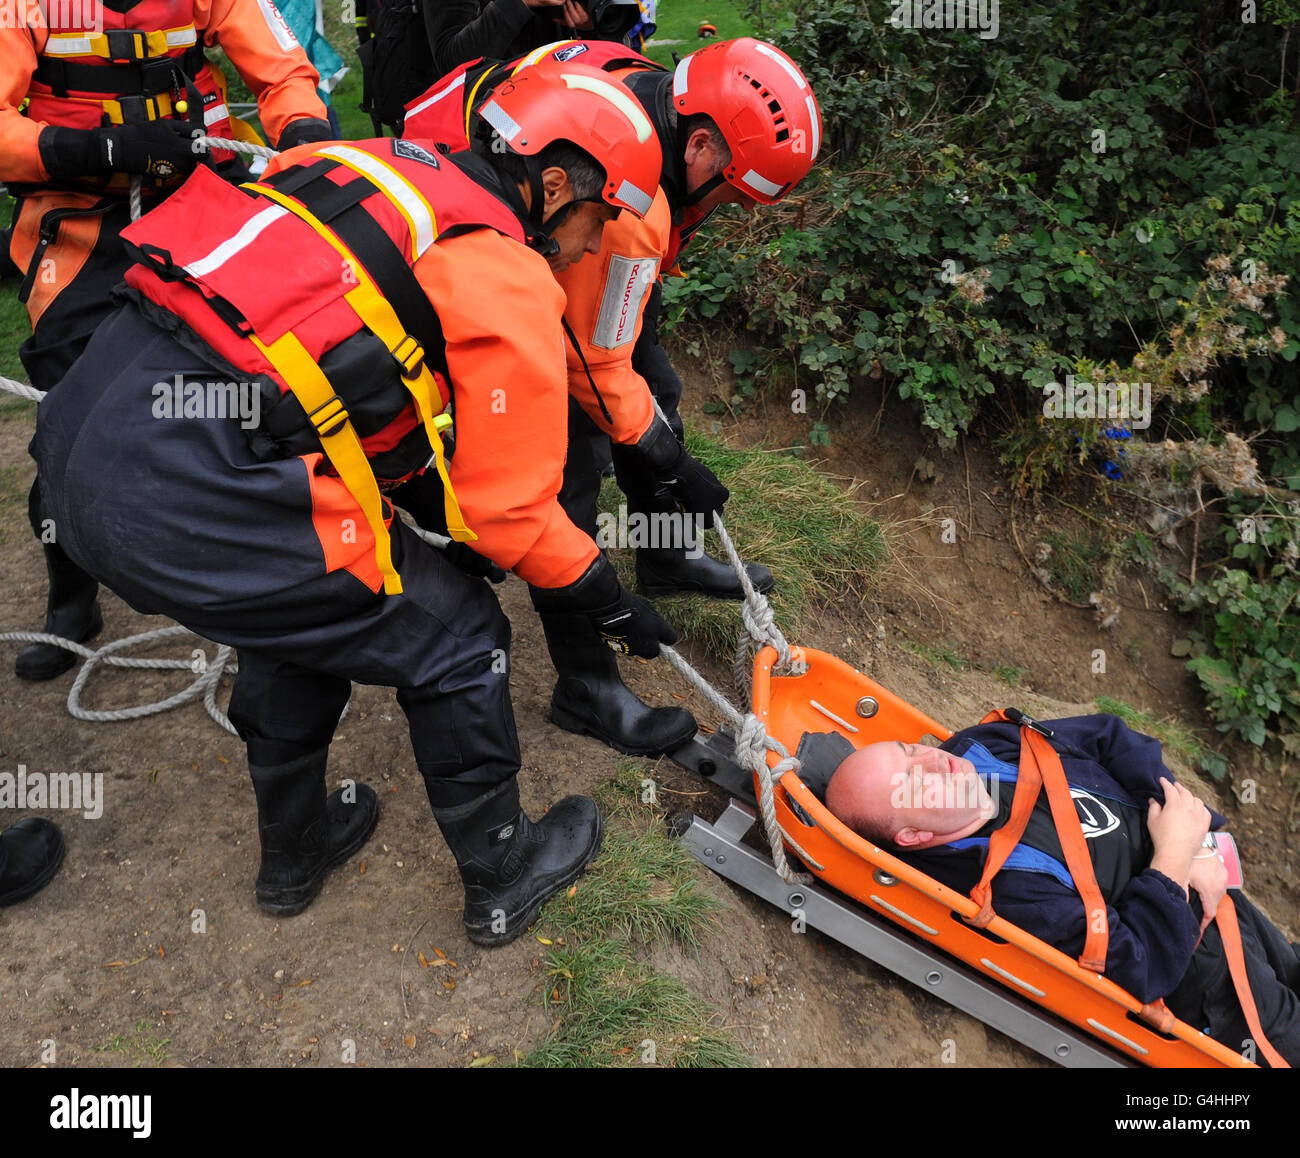 Firefighters move a casualty on a stretcher during a river rescue training exercise, at Hackney Marshes, in north east London. Stock Photo